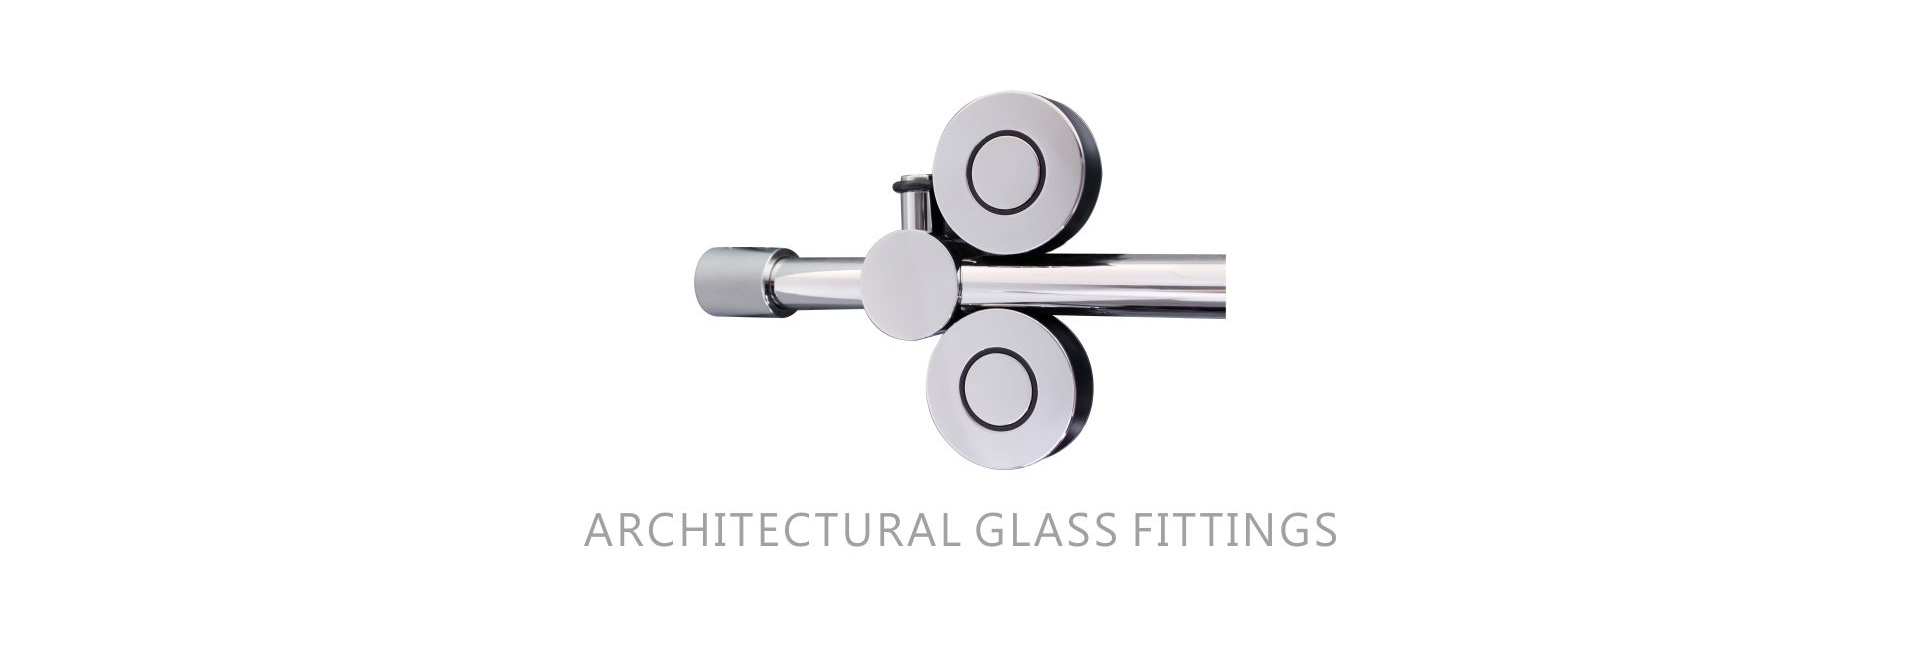 Architectural Glass Fittings suppliers